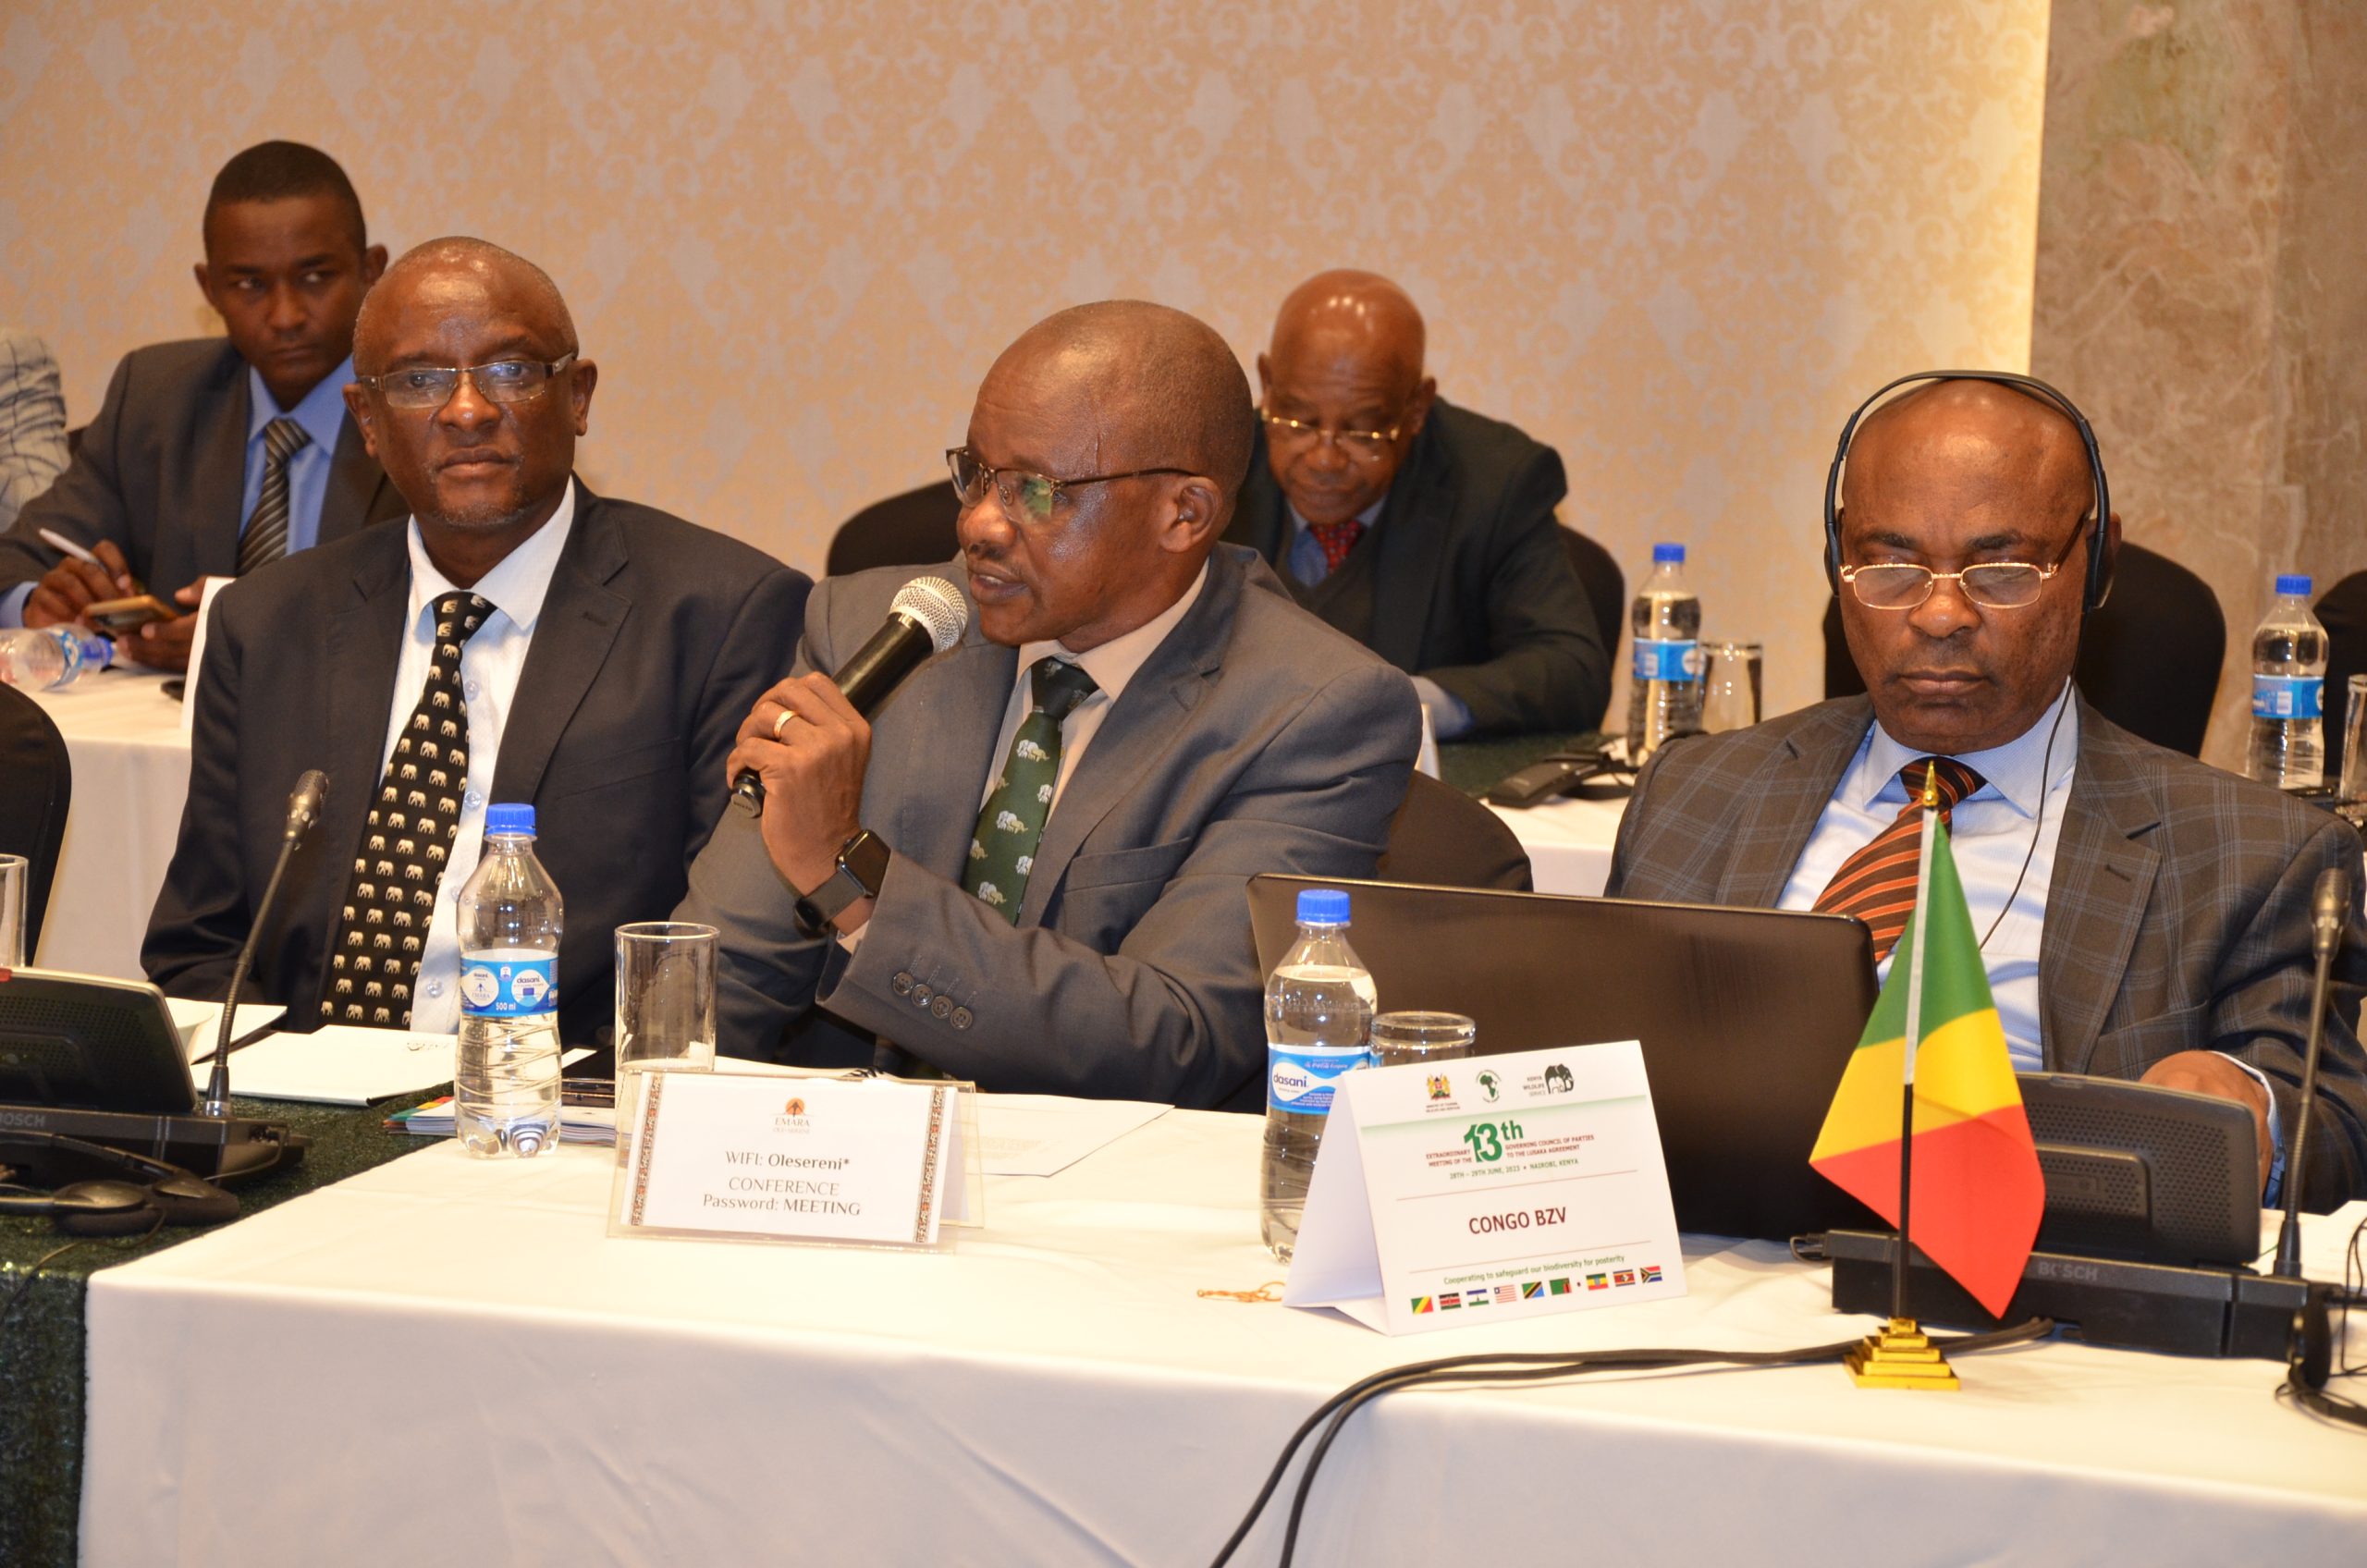 Secretary Administration, Wildlife, Mr. John Chelimo giving a speech during the Extraordinary meeting of the 13th Lusaka Agreement Governing Council